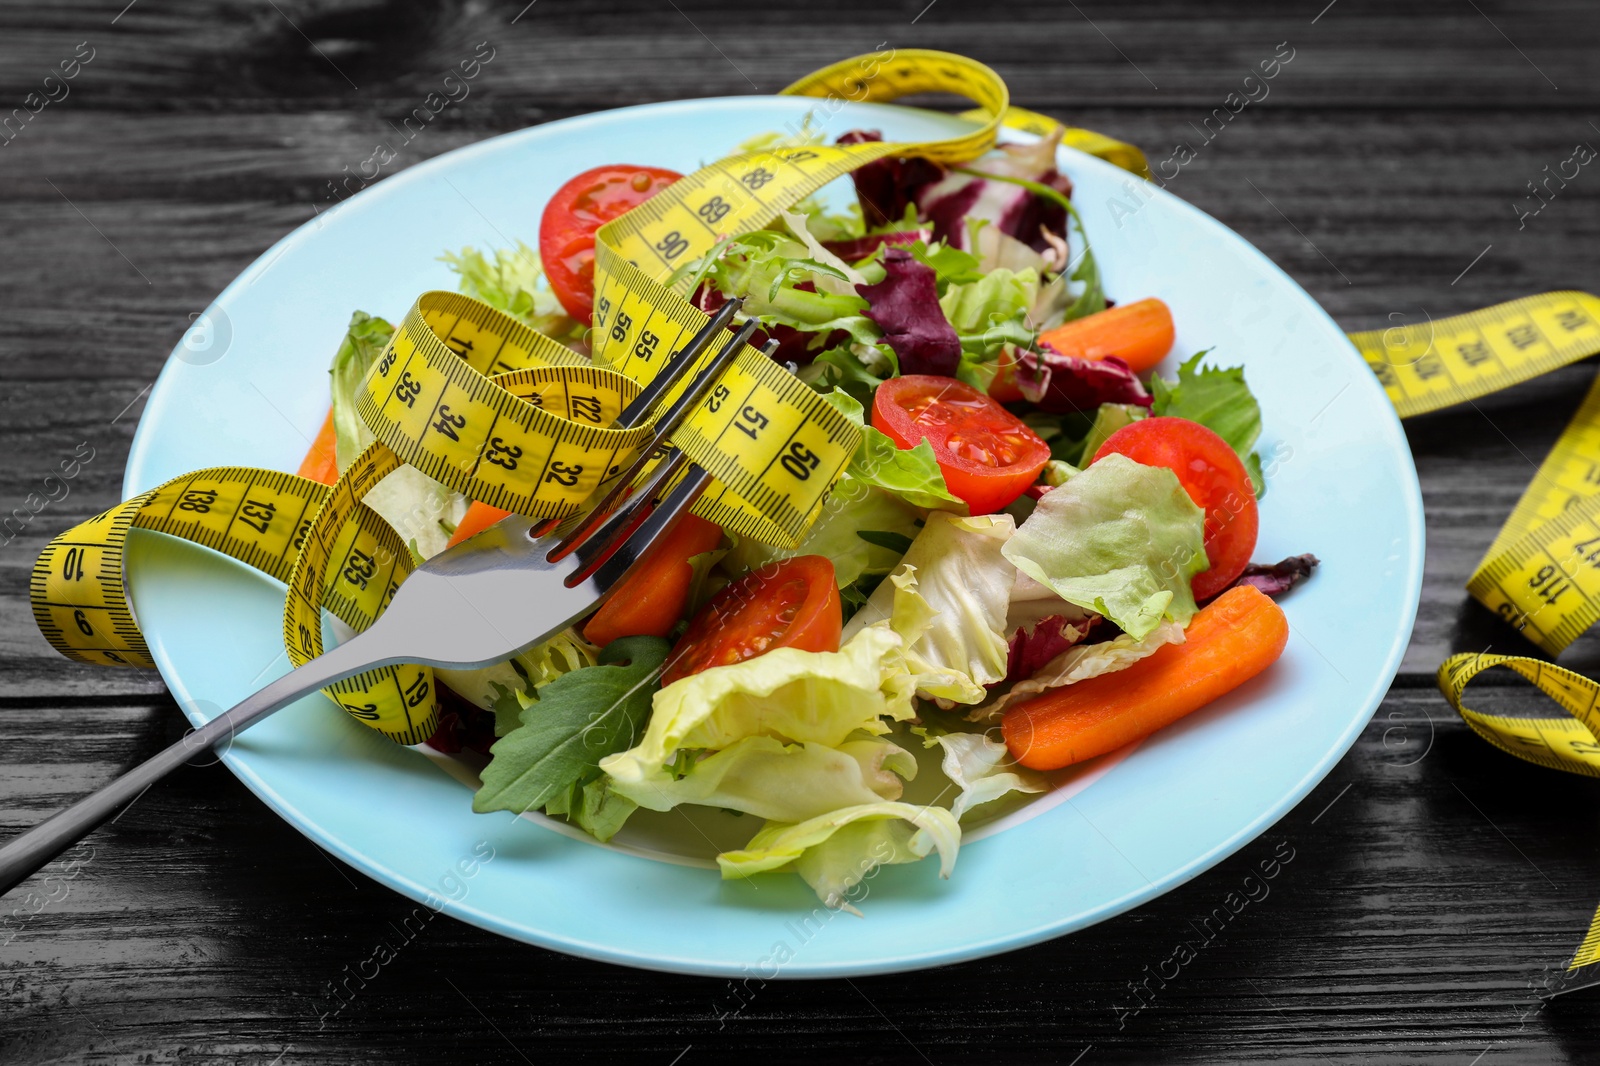 Photo of Plate with fresh vegetable salad, fork and measuring tape on wooden table, closeup. Healthy diet concept